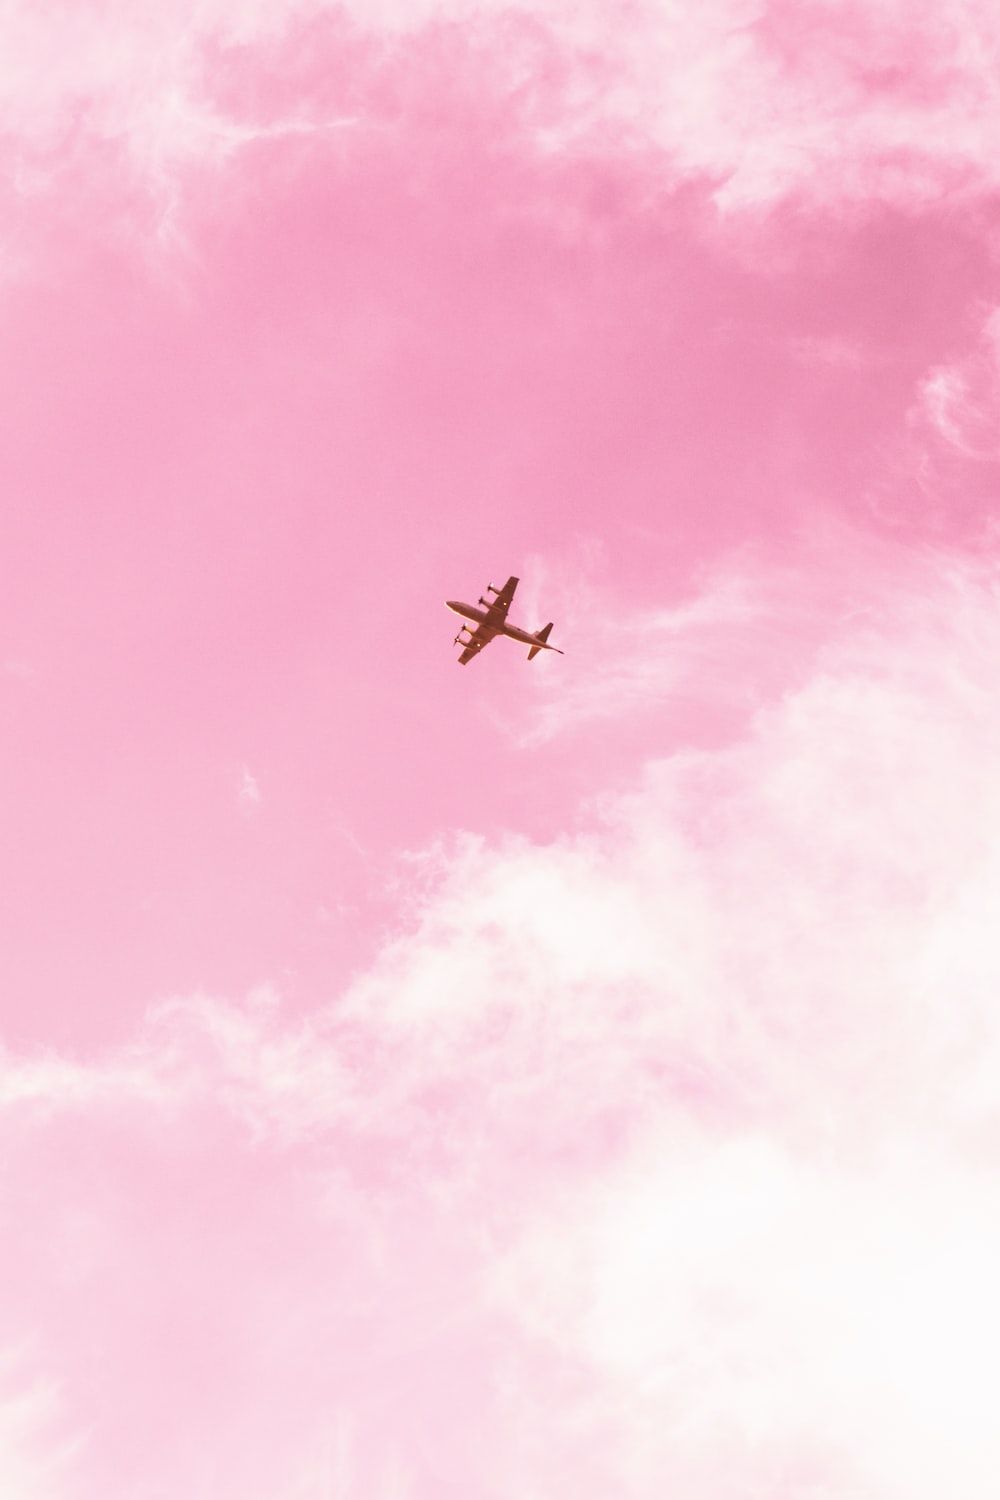 Airplane in the sky during daytime photo